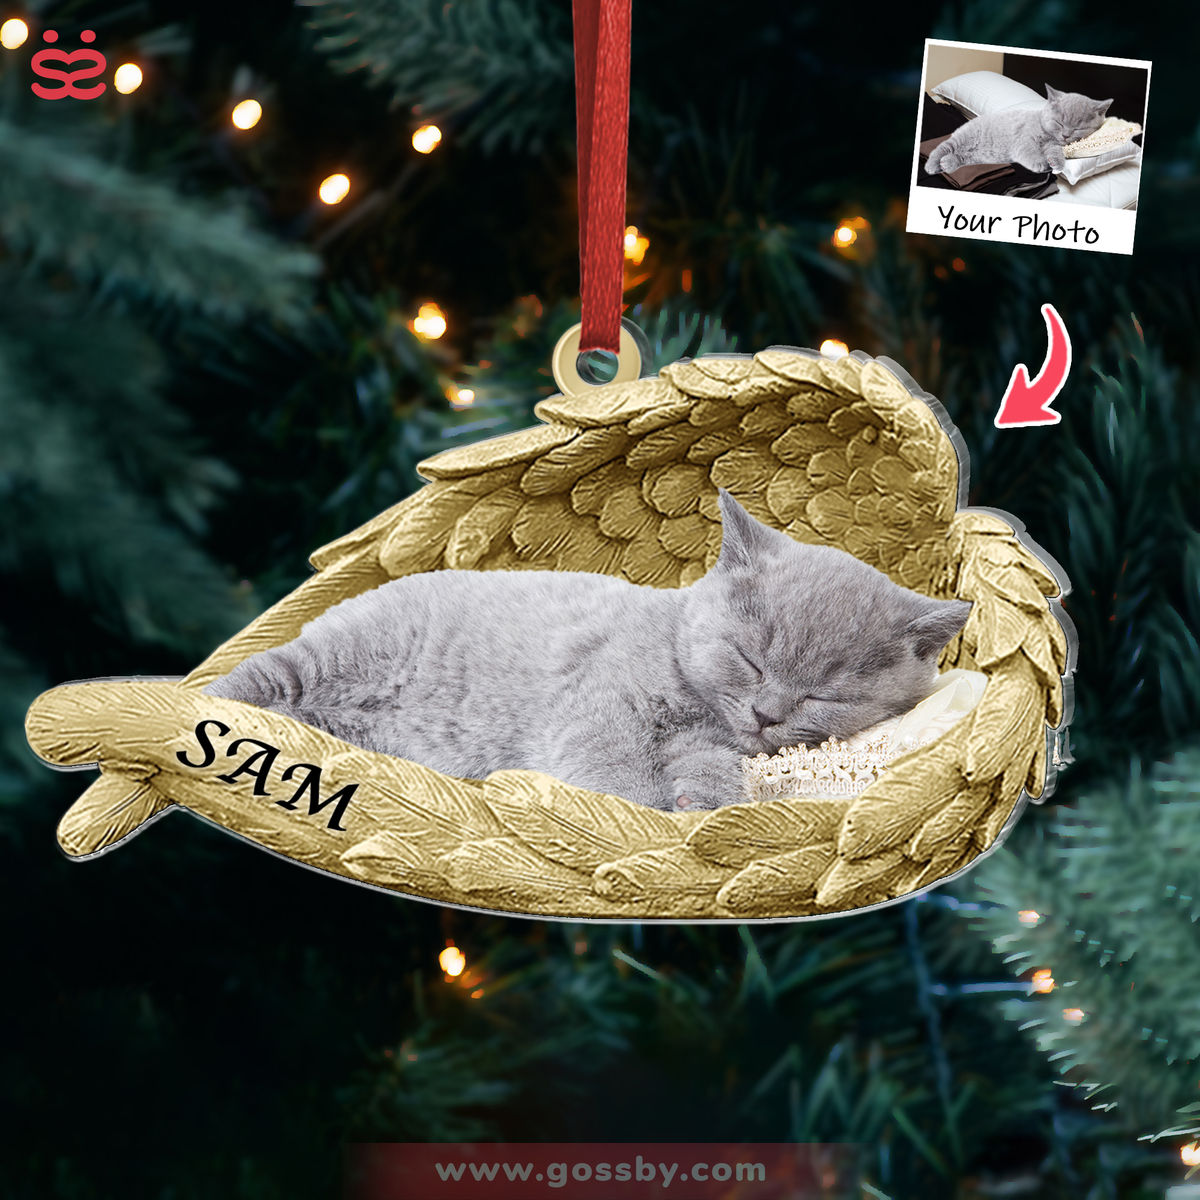 Cat Acrylic Ornament - Customized Your Photo Ornament - Sleeping Pet Within Angel Wings - Custom Ornament from Photo, Christmas Gifts_5